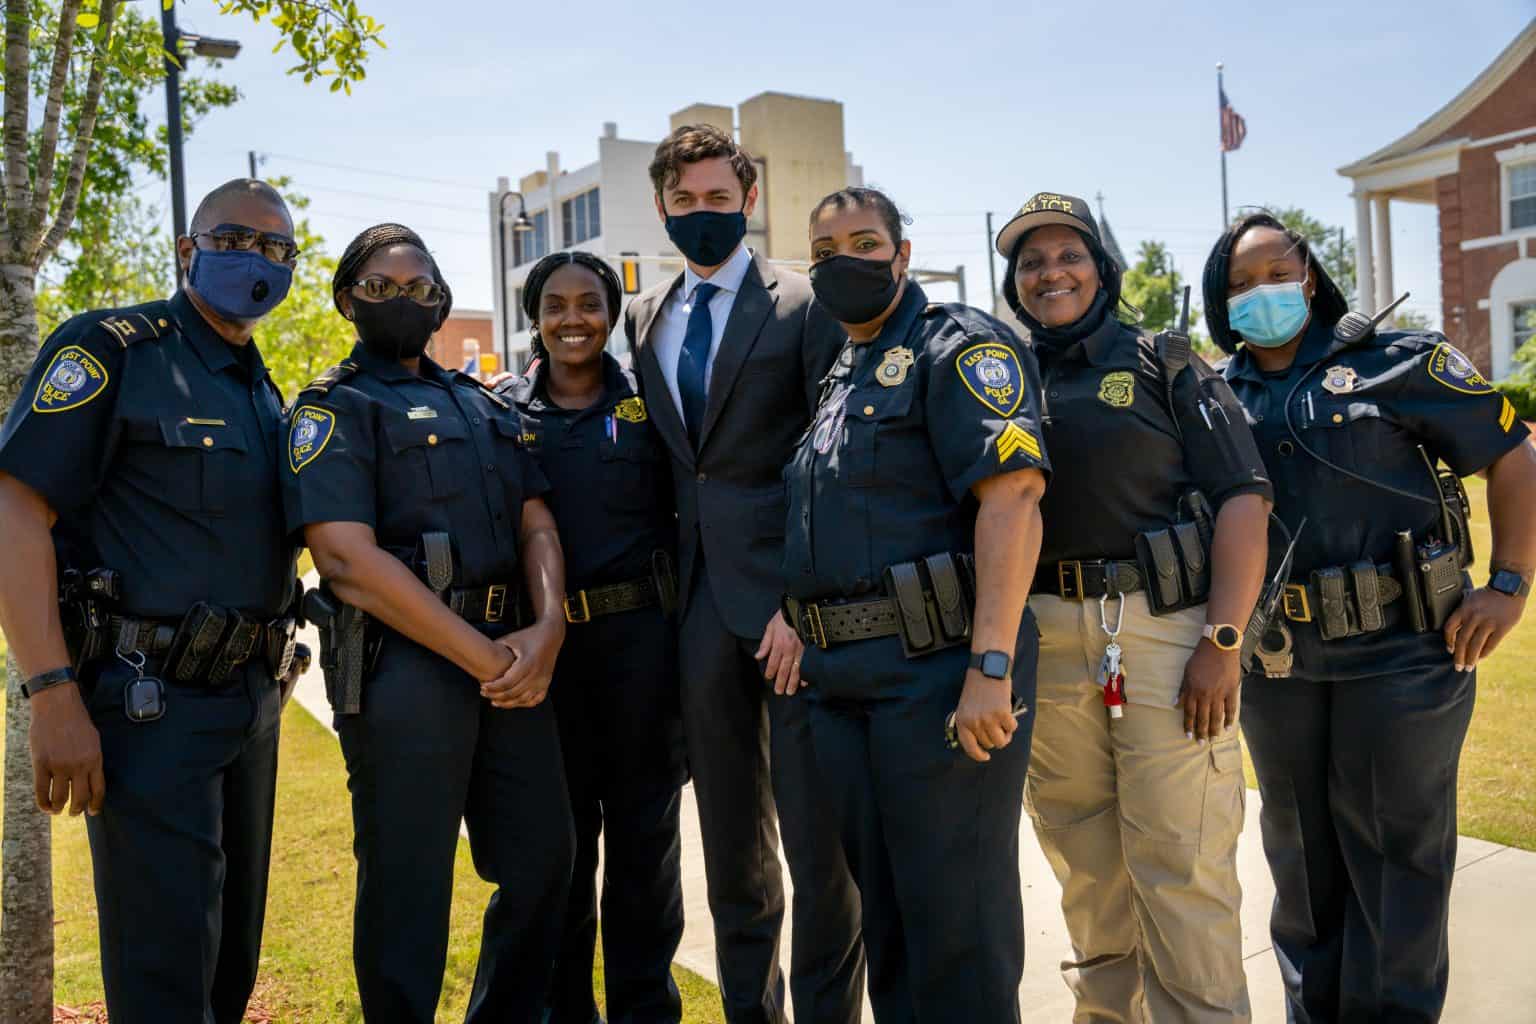 Senator Ossoff posing with six East Point, Georgia police officers.